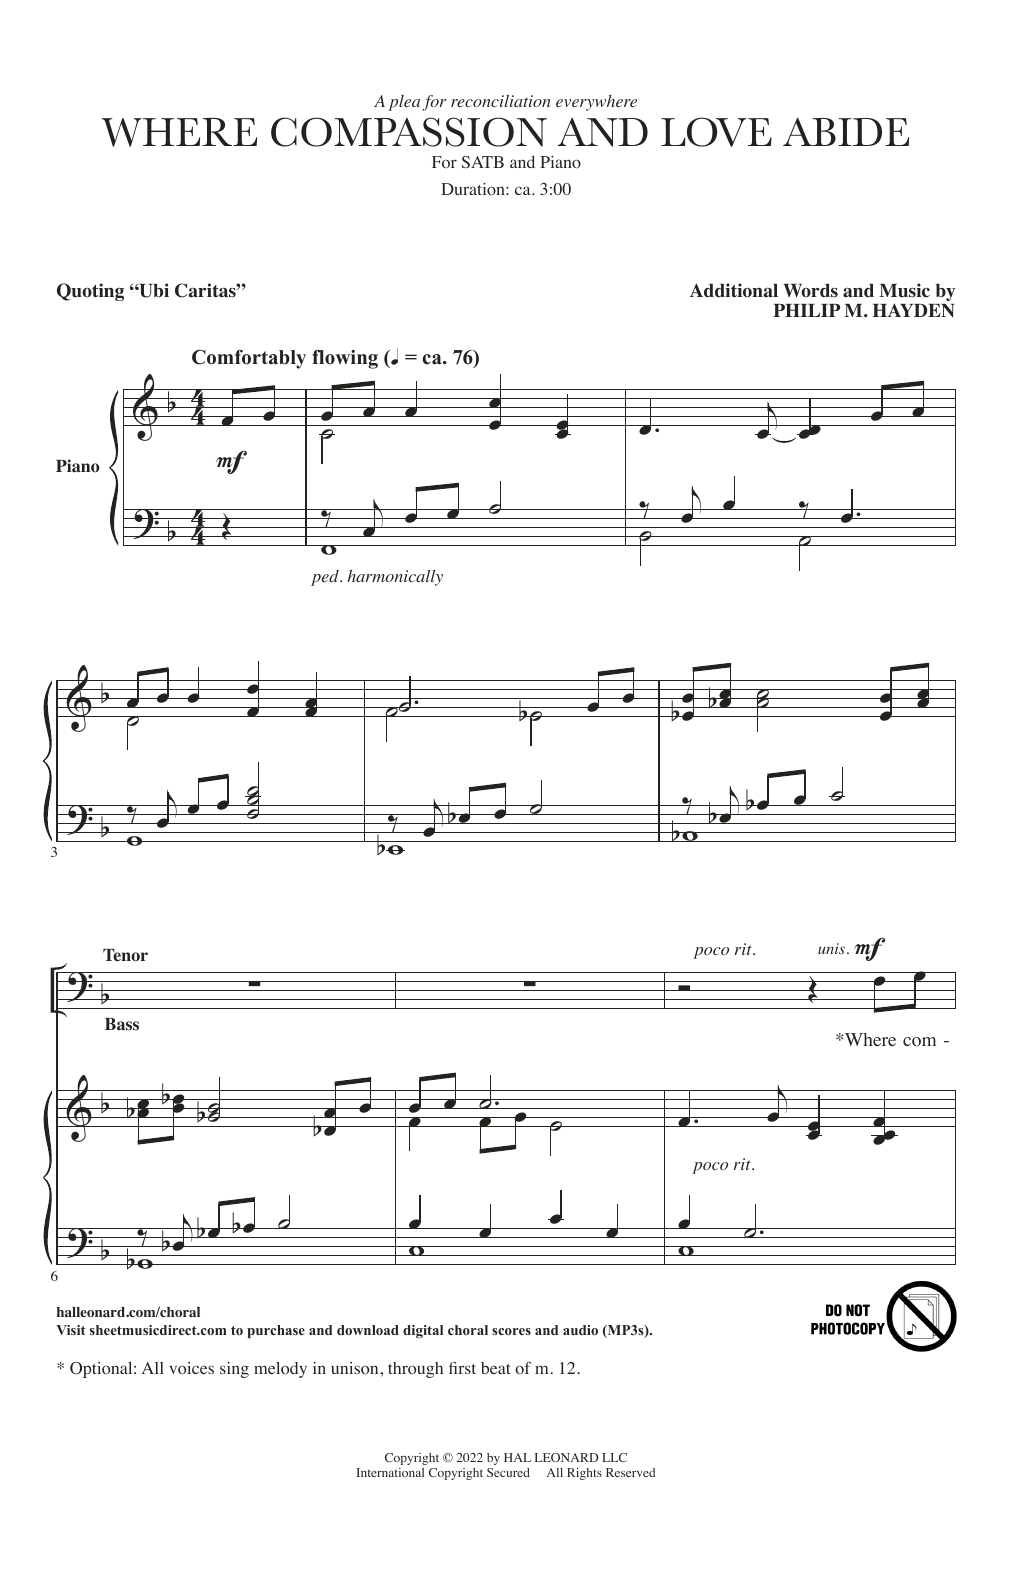 Download Philip M. Hayden Where Compassion And Love Abide (Ubi Ca Sheet Music